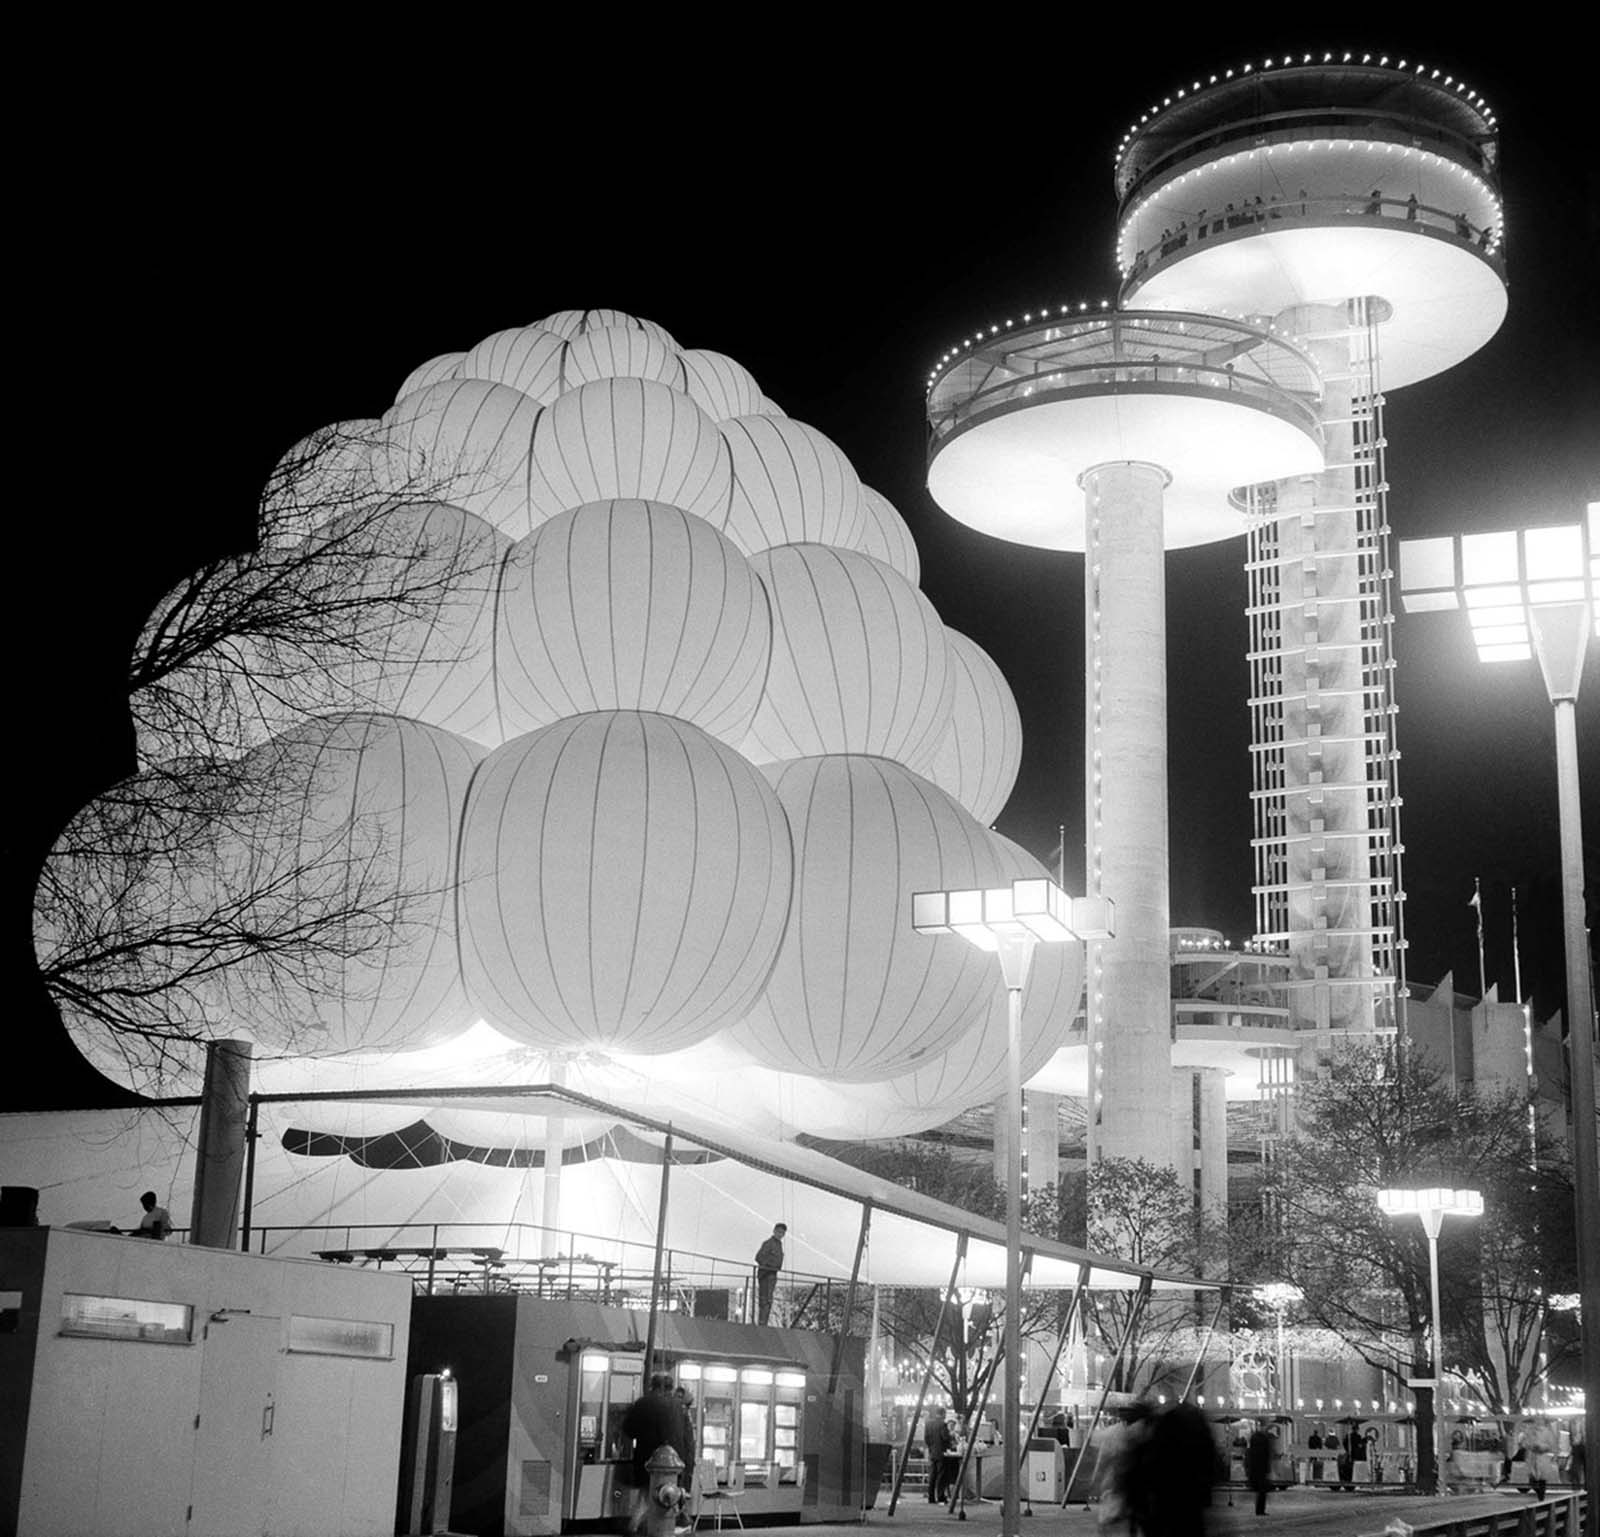 One of the Brass Rail lunch bars at the World's Fair gives the appearance of a mass of balloons tied together on August 11, 1964. The towers at right are observation platforms, part of the New York State pavilion.